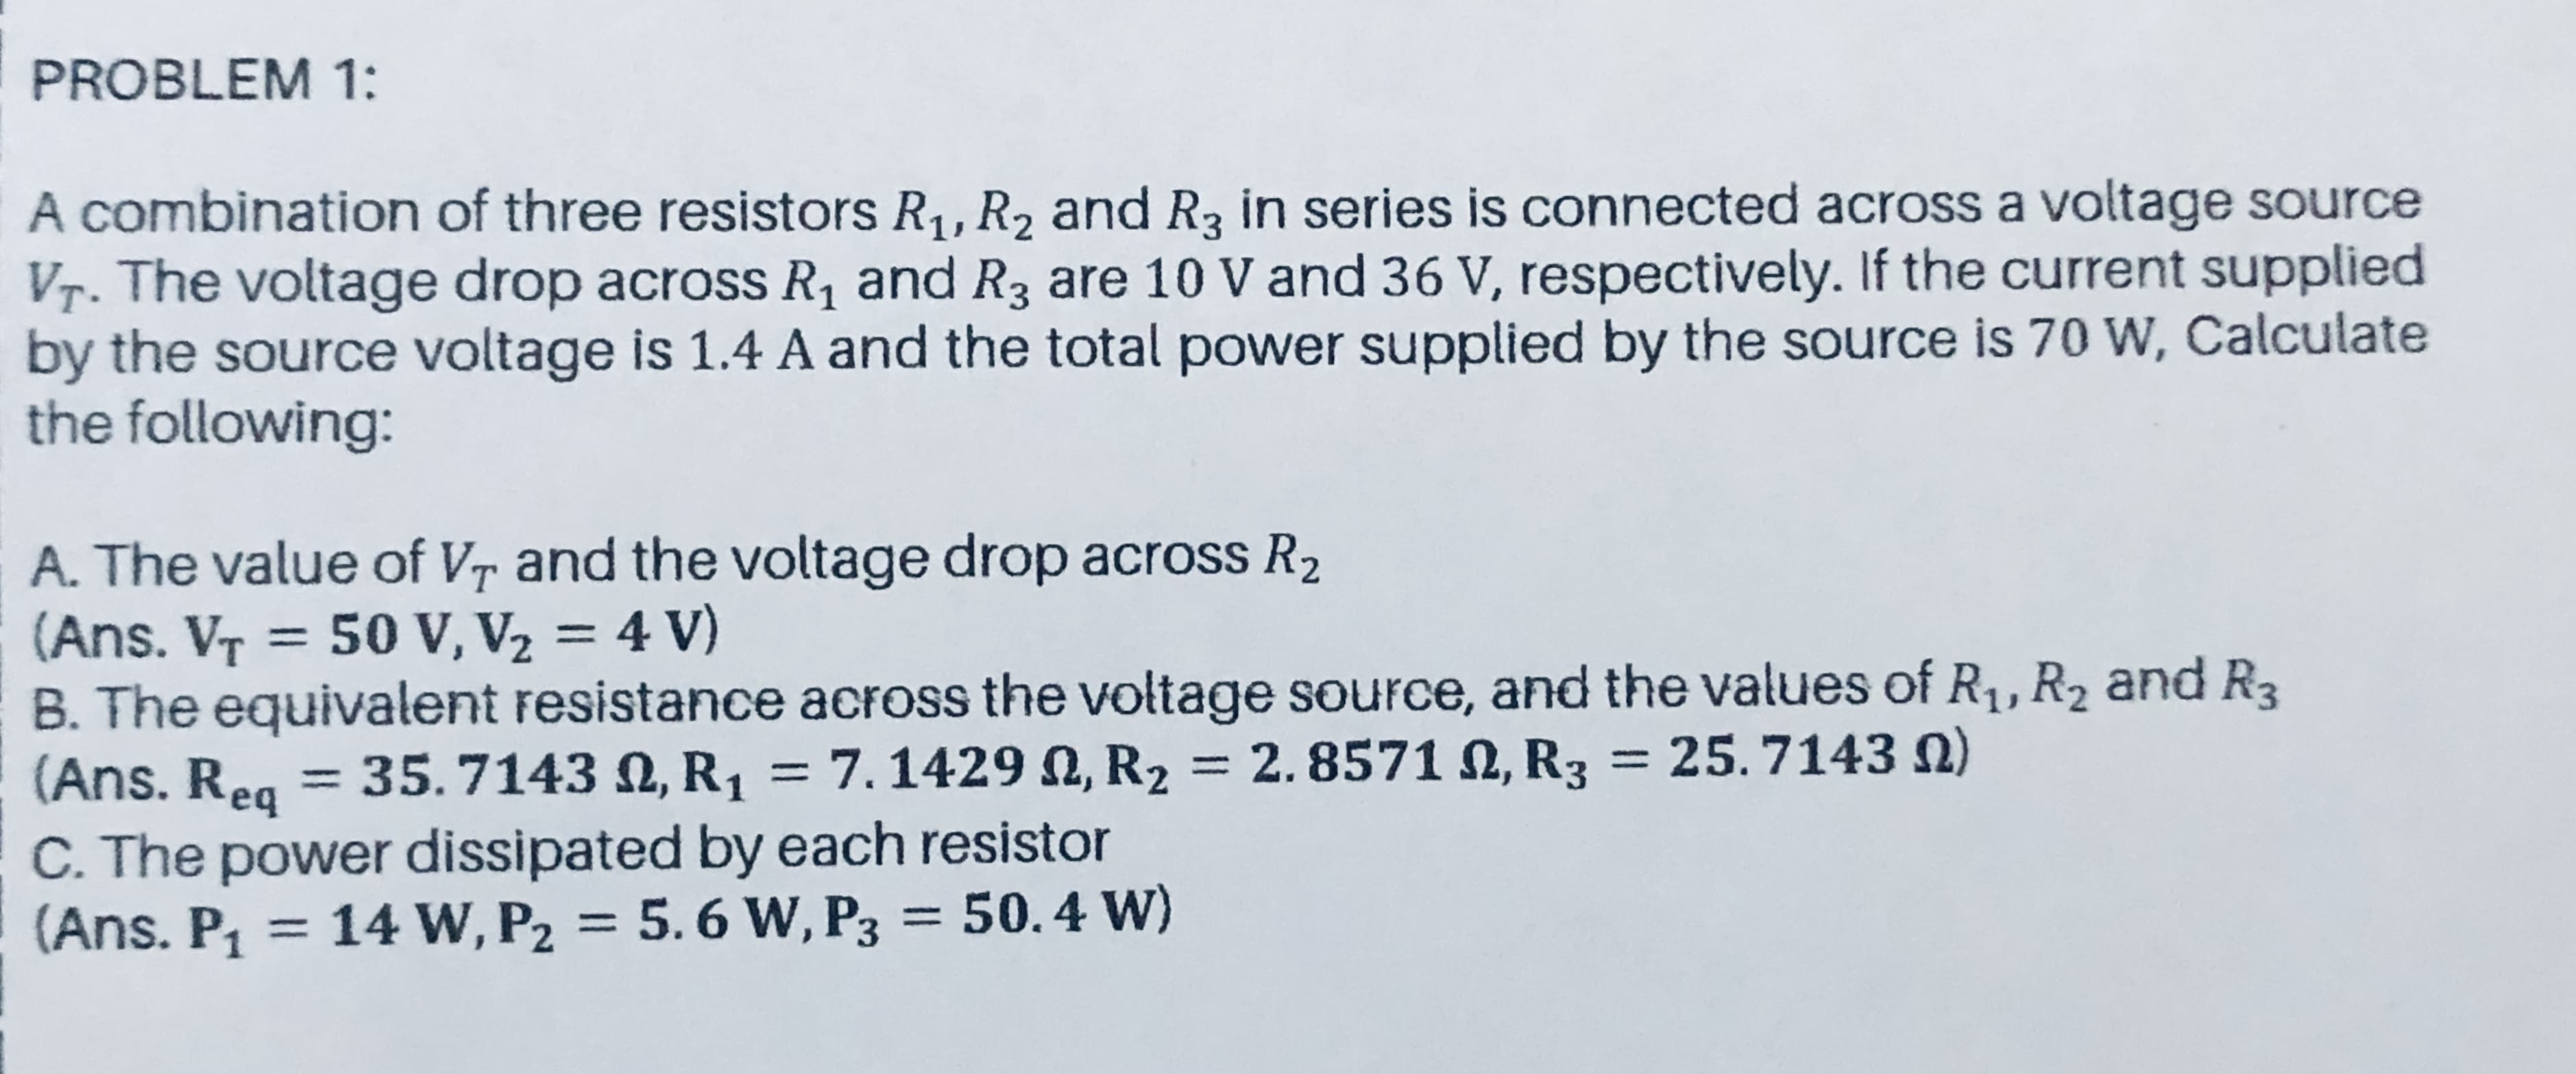 PROBLEM 1:
A combination of three resistors R,, R, and R3 in series is connected across a voltage source
Vr. The voltage drop across R, and R3 are 10 V and 36 V, respectively. If the current supplied
by the source voltage is 1.4 A and the total power supplied by the source is 70 W, Calculate
the following:
A. The value of Vr and the voltage drop across R2
(Ans. VT = 50 V, V2 = 4 V)
B. The equivalent resistance across the voltage source, and the values of R,, R2 and R3
(Ans. Reg = 35.7143 N, R1 = 7.1429 N, R2 = 2. 8571 N, R3 = 25. 7143 N)
C. The power dissipated by each resistor
(Ans. P, = = 50.4 w)
%3D
%3|
%3D
14 W, P2 = 5. 6 W, P3
%3D
%3D
%3D
